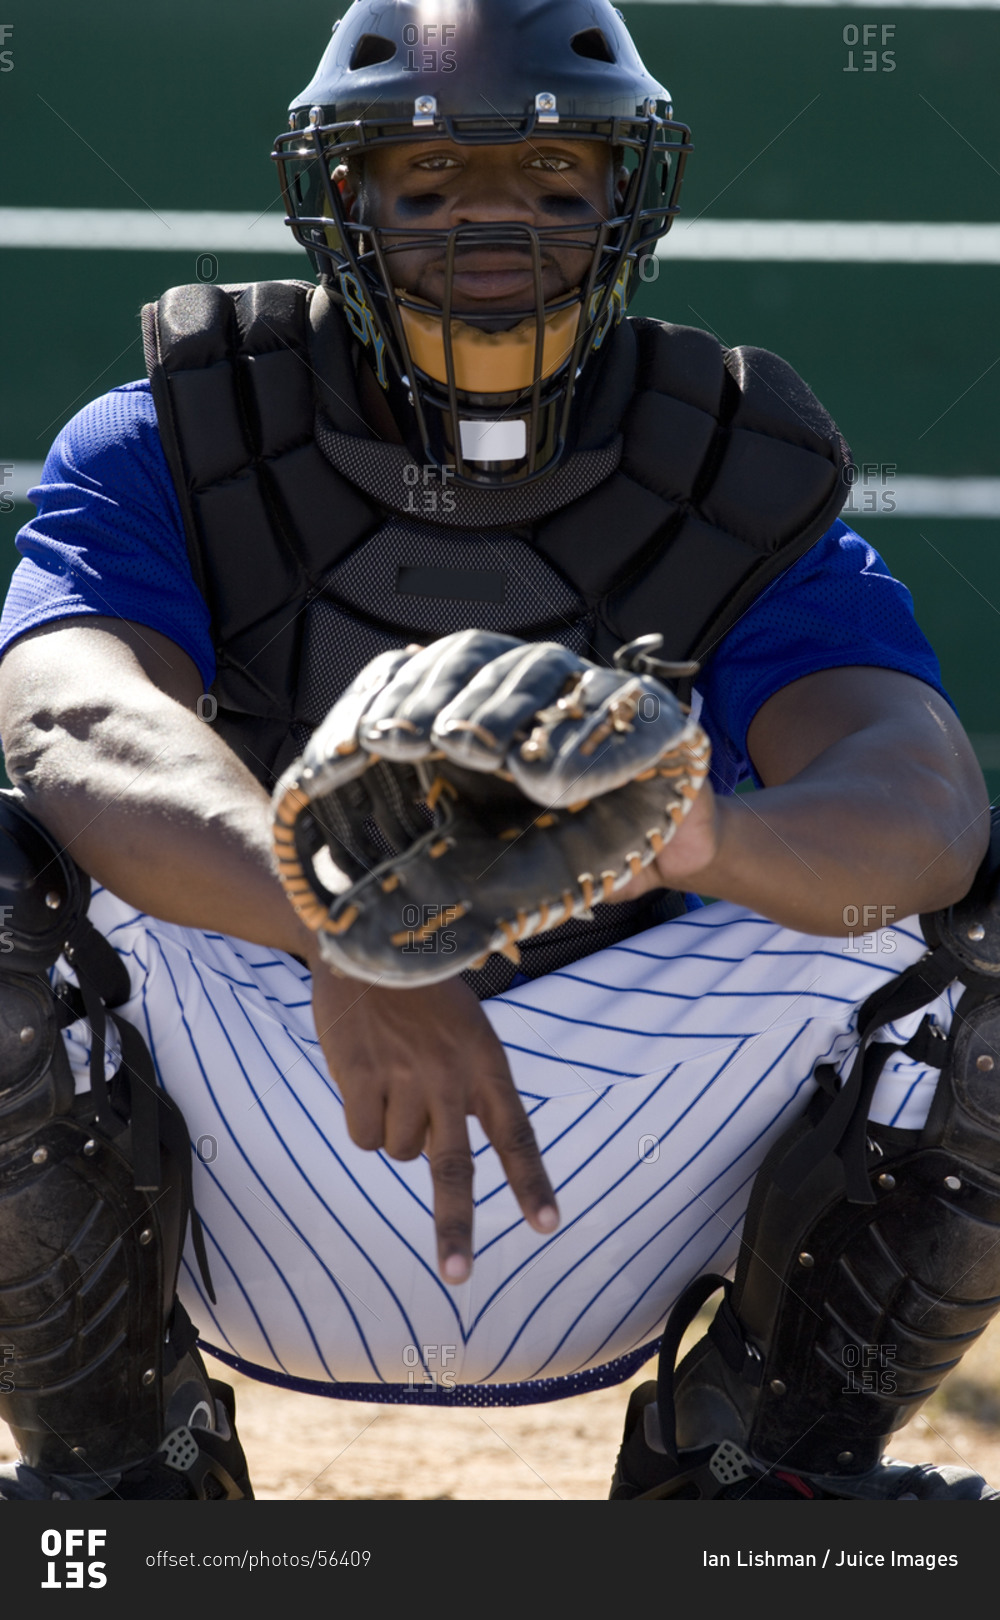 Baseball catcher crouching on pitch, making secret signal with fingers, front view, portrait